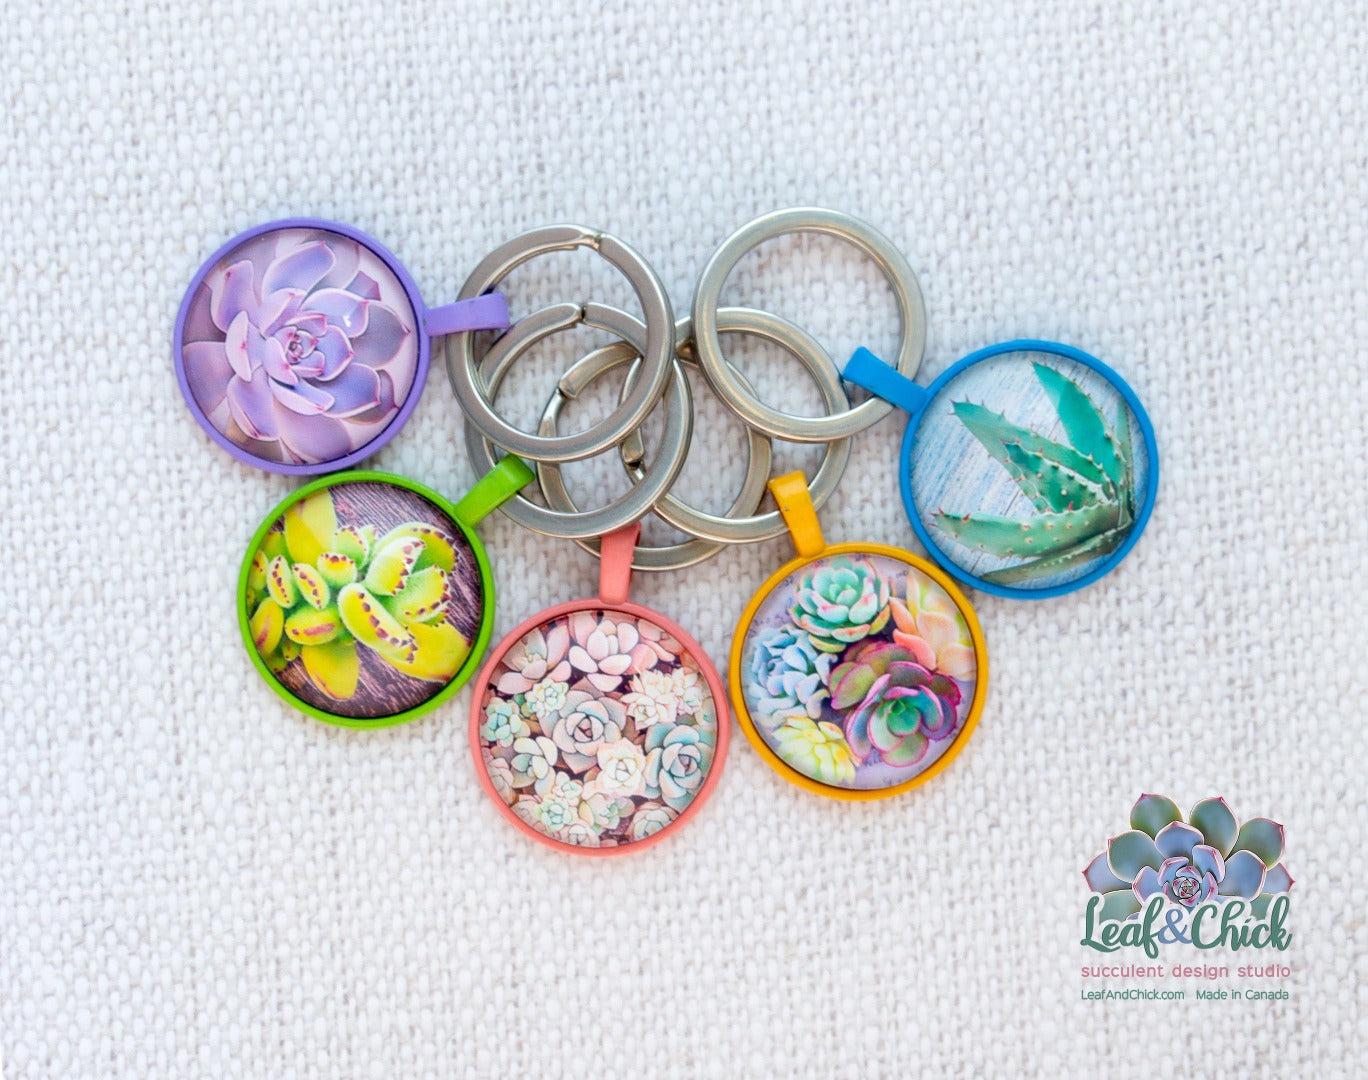 five colourful keychains